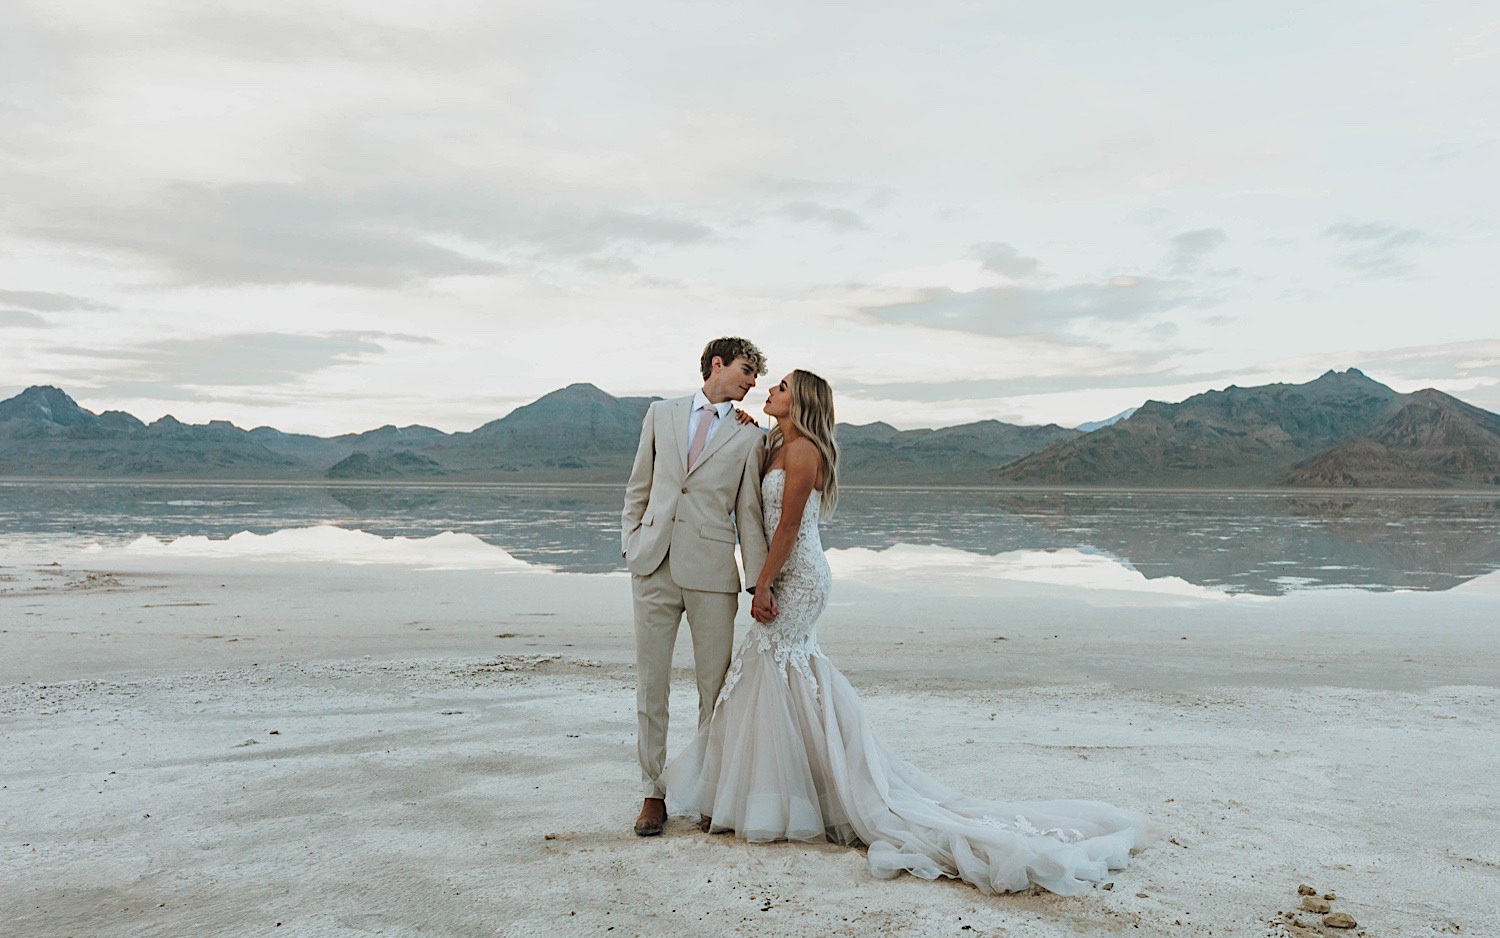 During an elopement at the Utah Salt Flats near Salt Lake City, a bride and groom stand next to one another and are about to kiss with the mountains and salt flats behind them